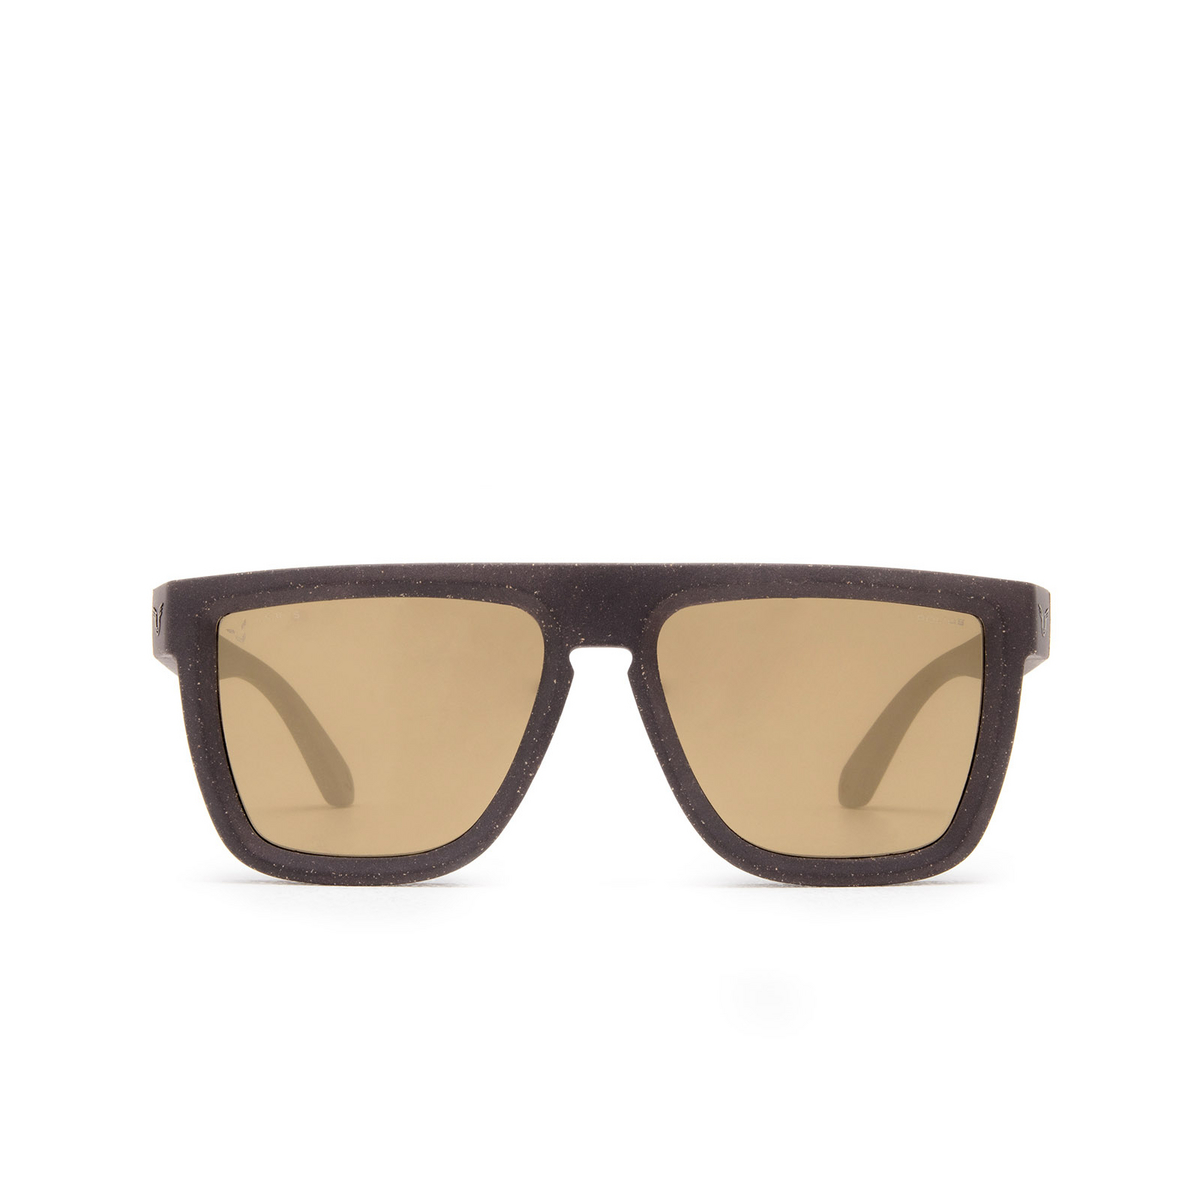 Police LEWIS 44 Sunglasses 0J35 Brown - front view